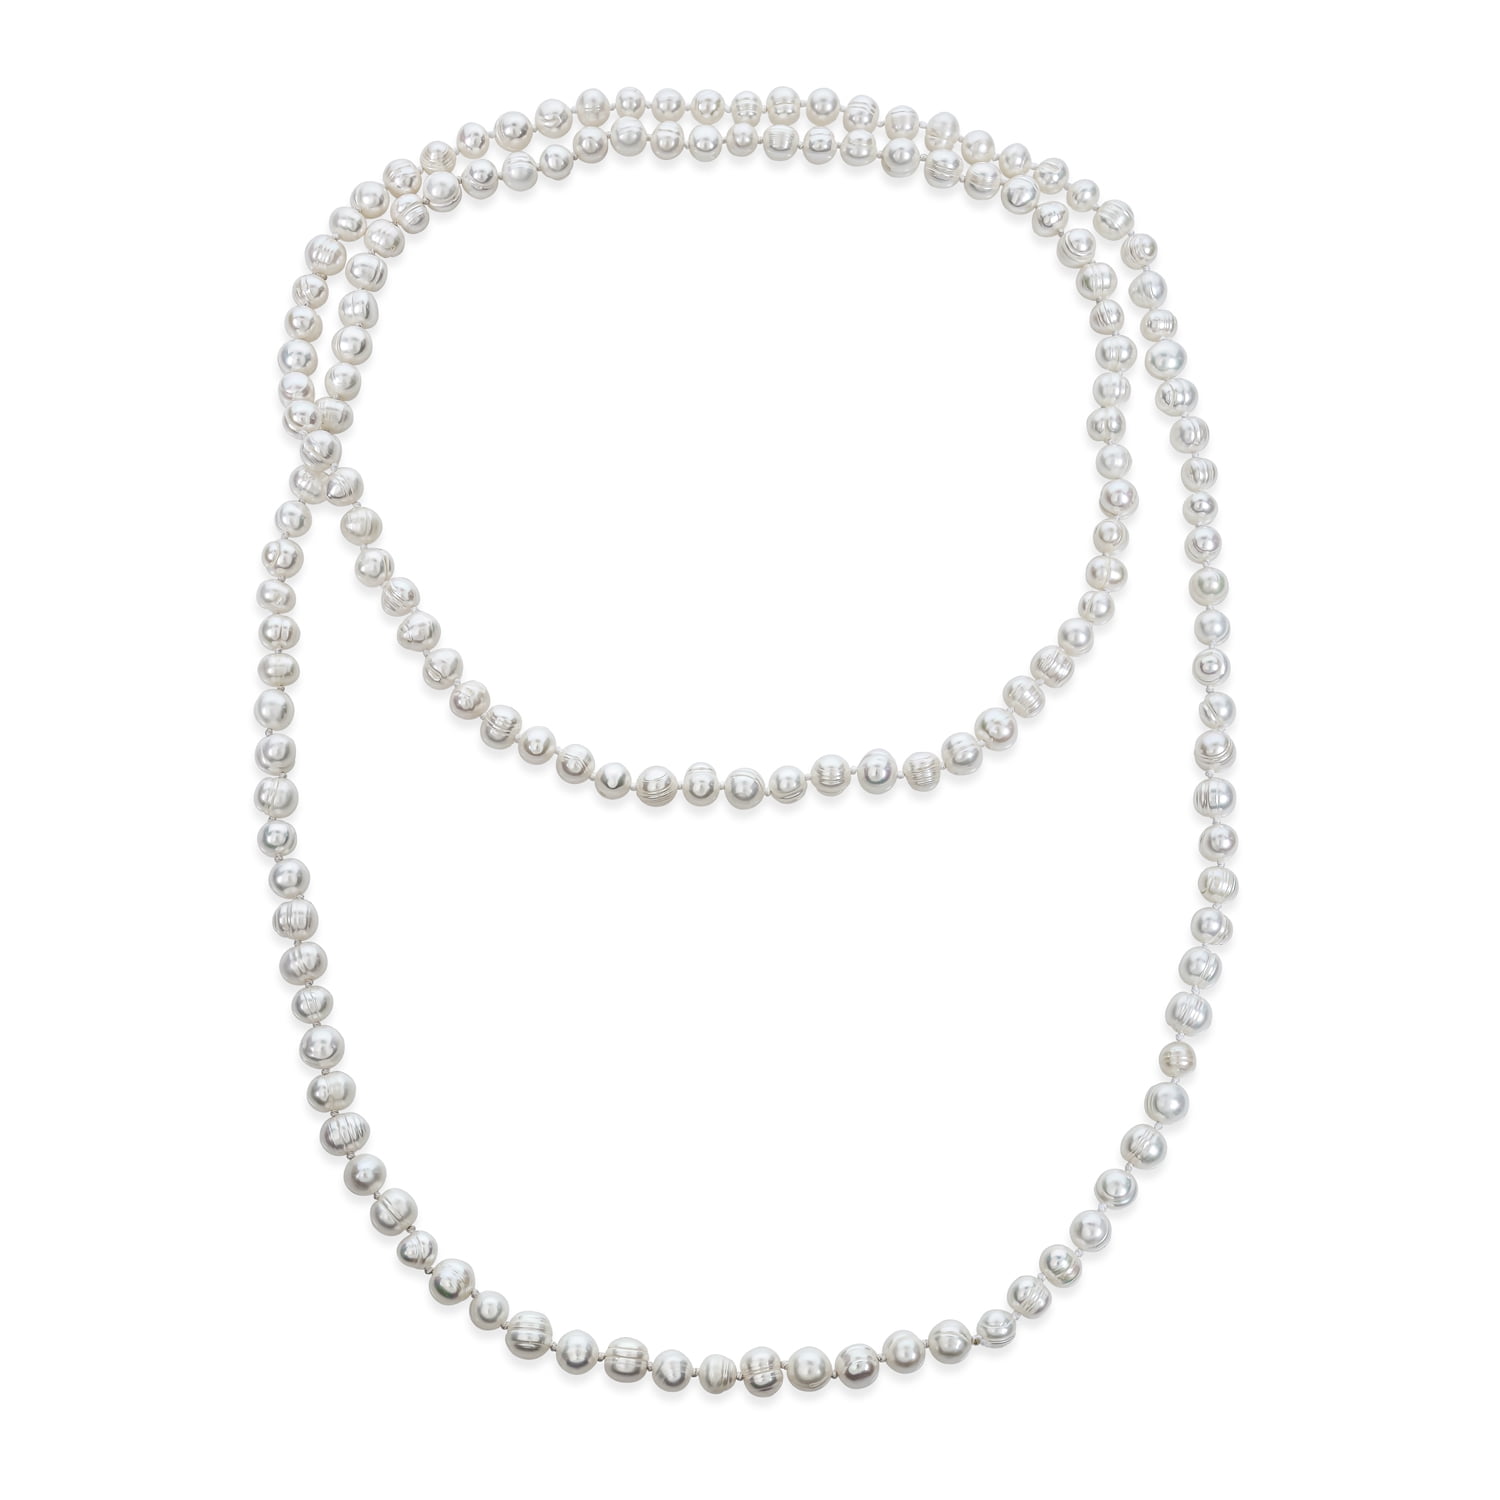 Long 8-9mm white AAA Freshwater CULTURED round pearl necklace 36 inches